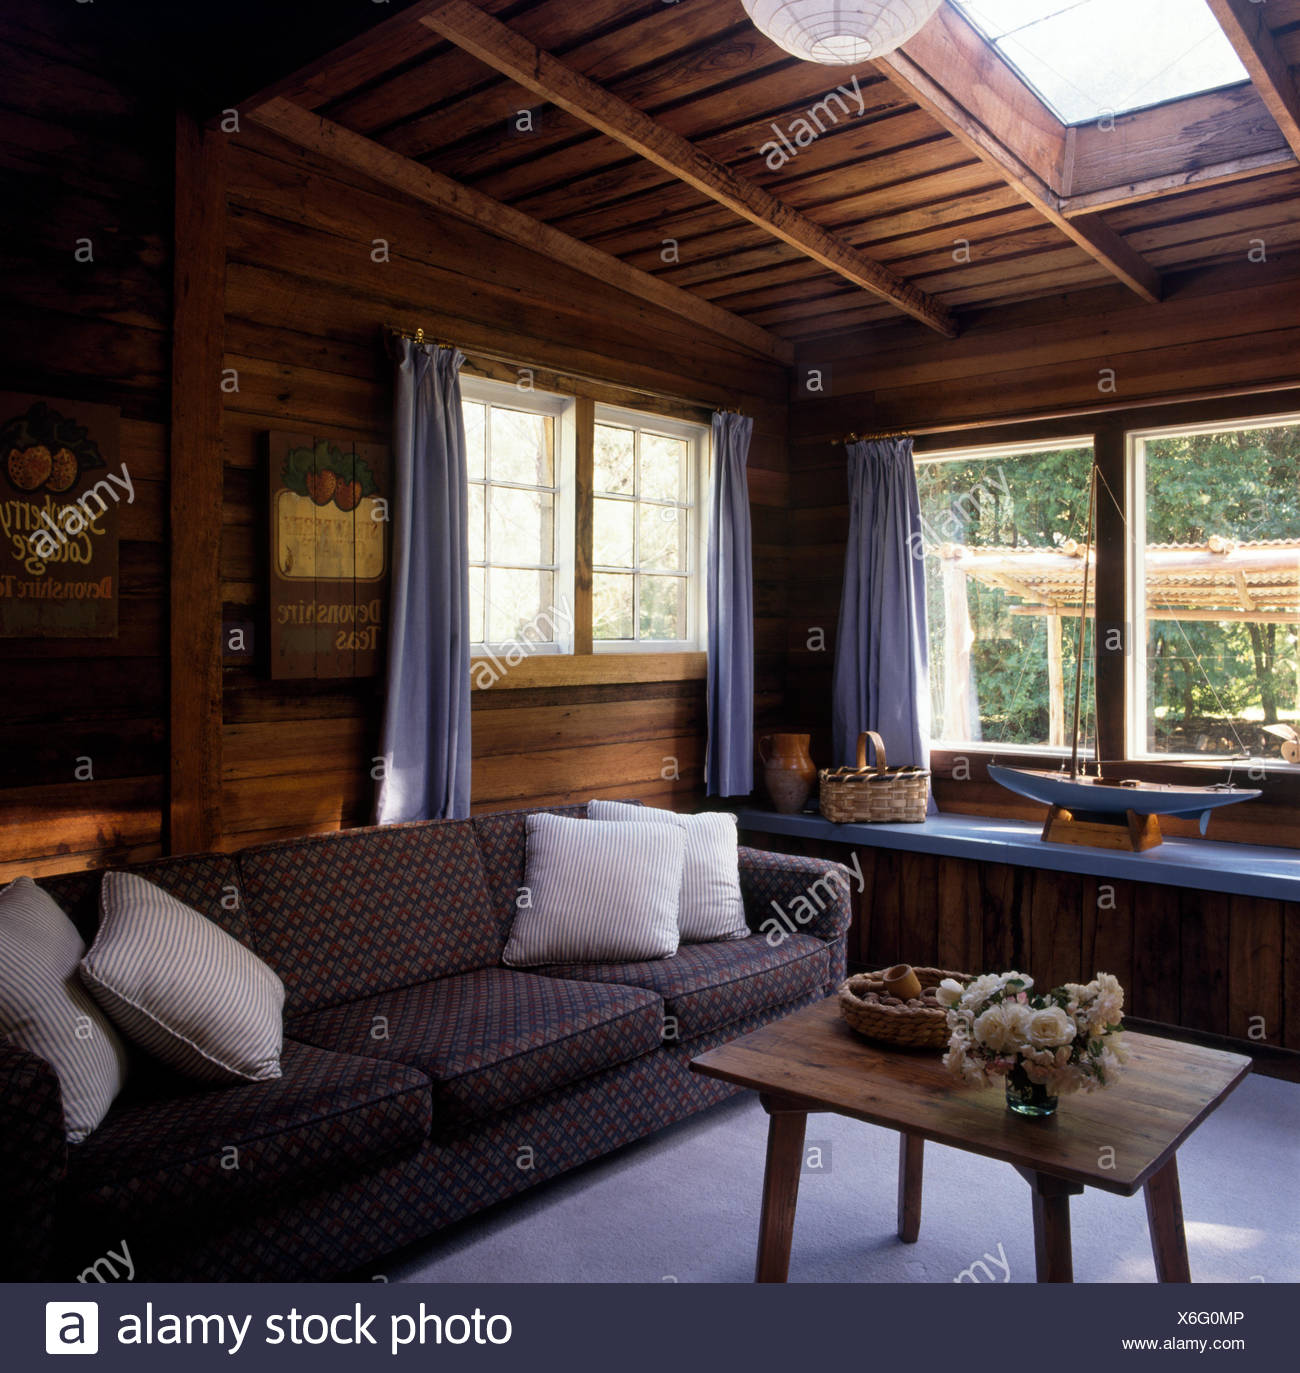 Wood Paneled Ceiling And Walls In Living Room With A Rustic